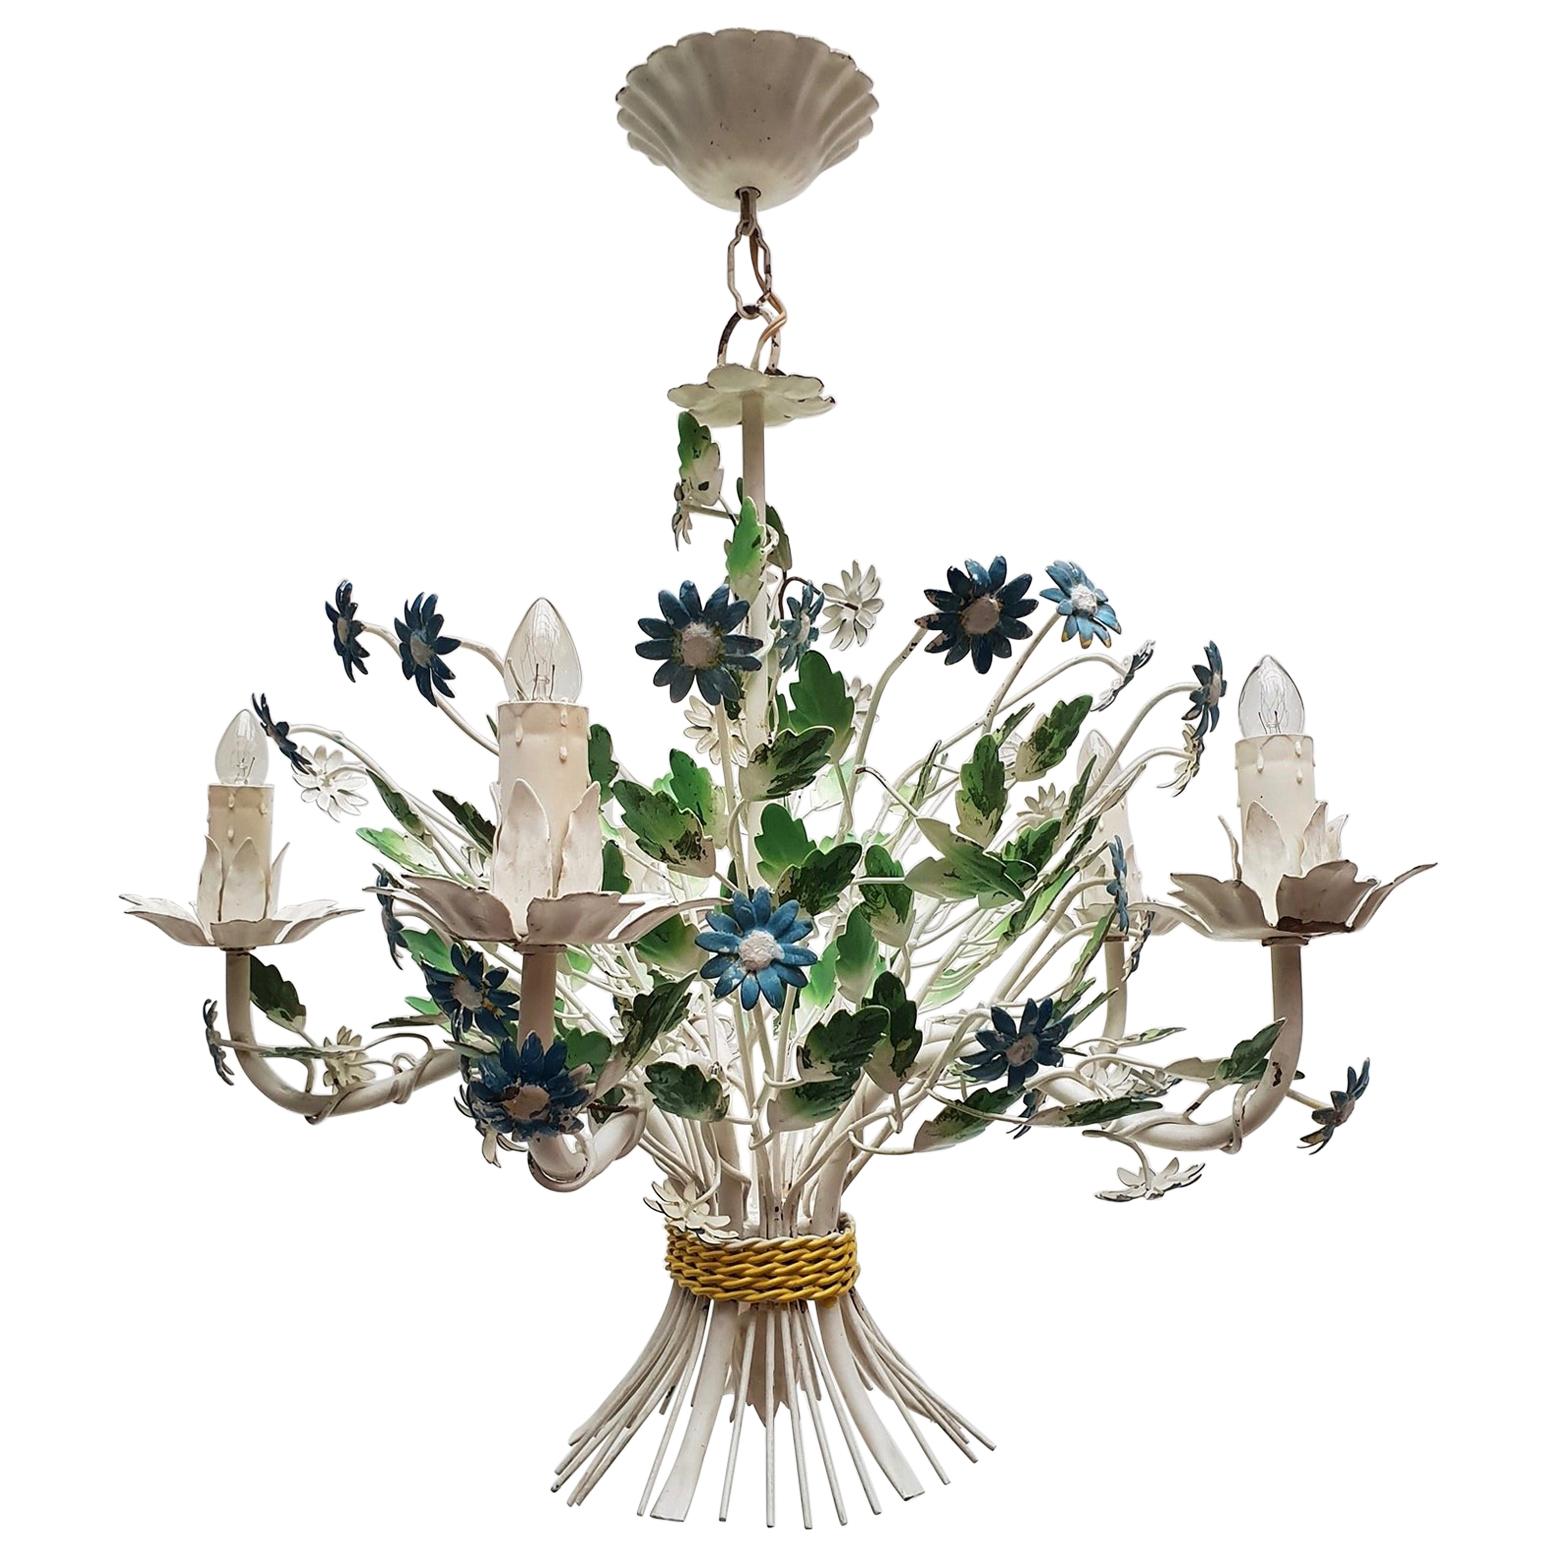 Midcentury French Painted Iron and Tole Chandelier with Flowers